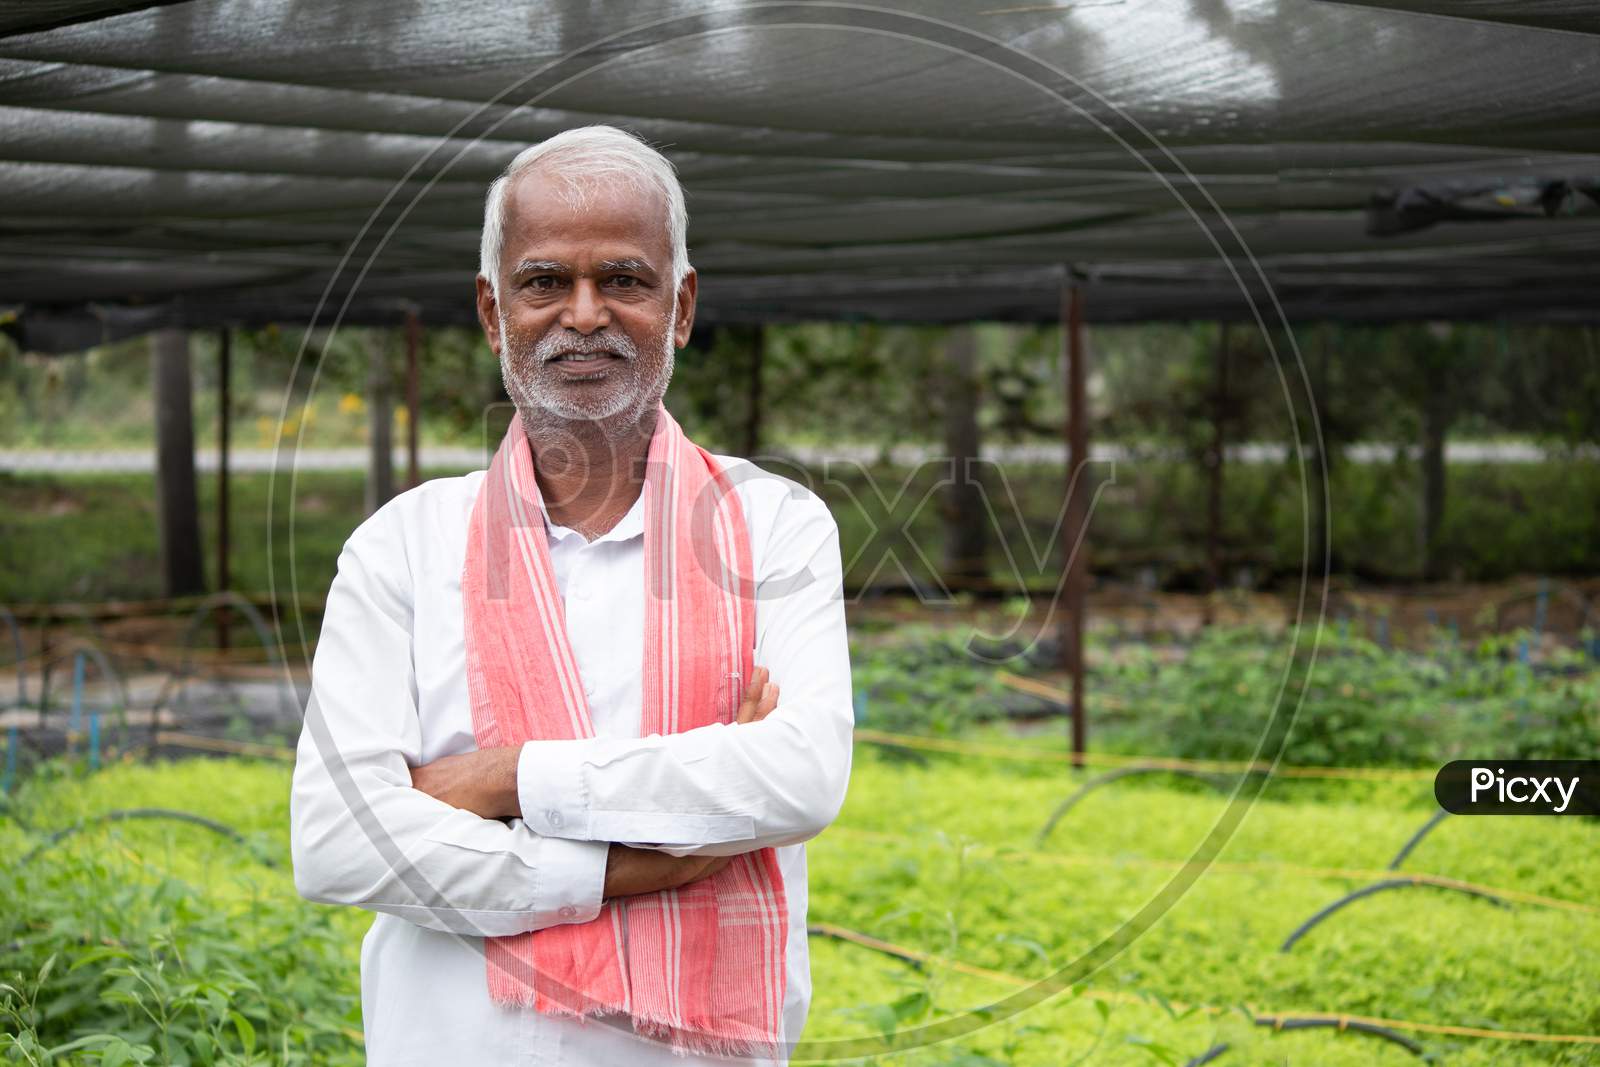 Medium Close Up Shot Of Smiling Senior Inidan Farmer With Arms Crossed Confidently Standing In The Greenhouse Or Poly House With Grown Green Samplings Behind